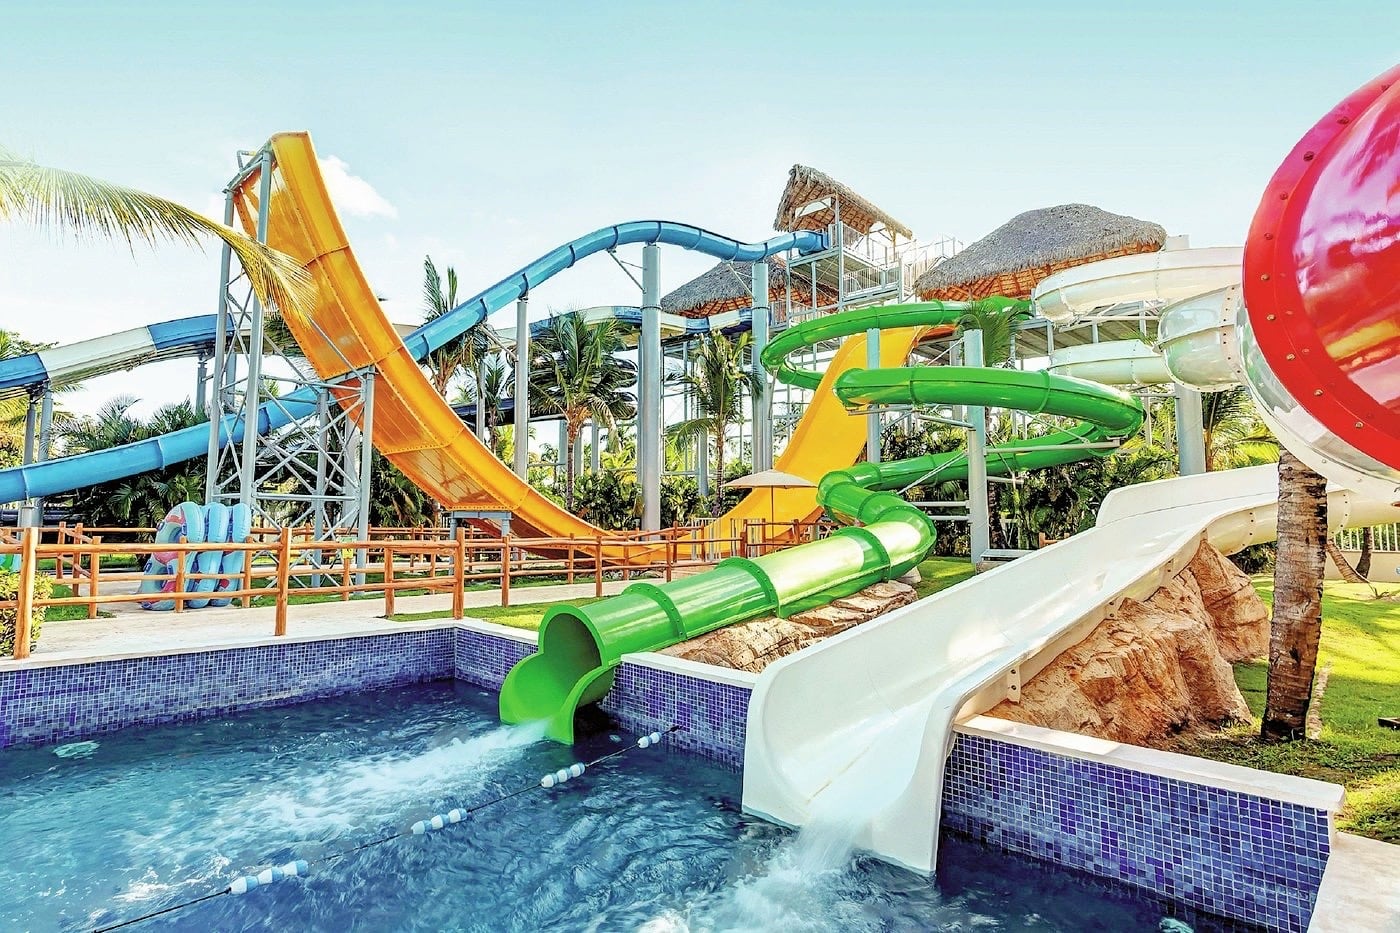 waterslides at waterpark in Dominican Republic